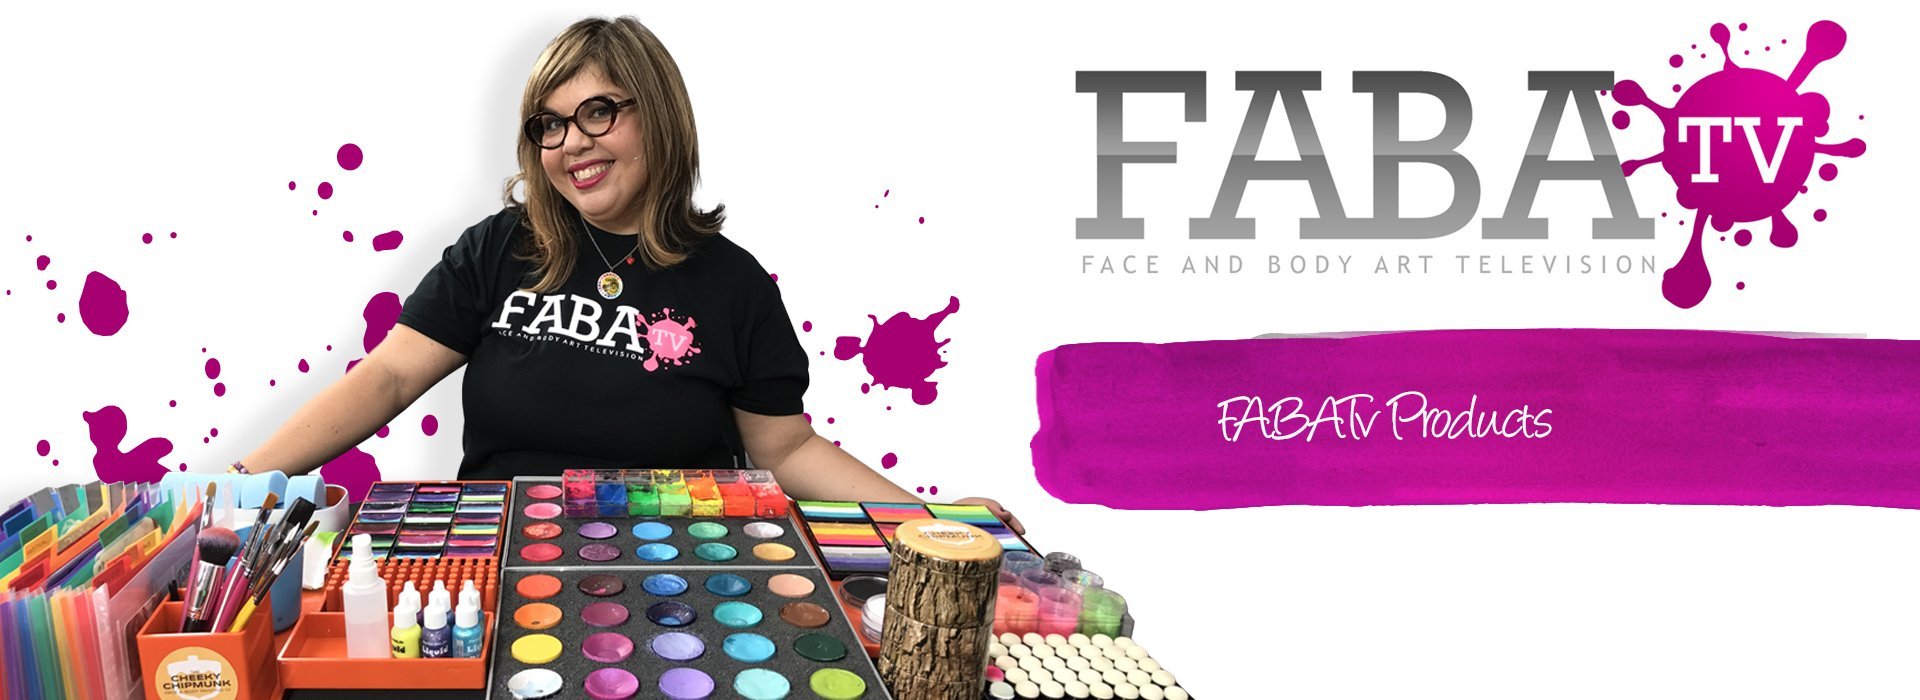 FABATv Products | Silly Farm Supplies